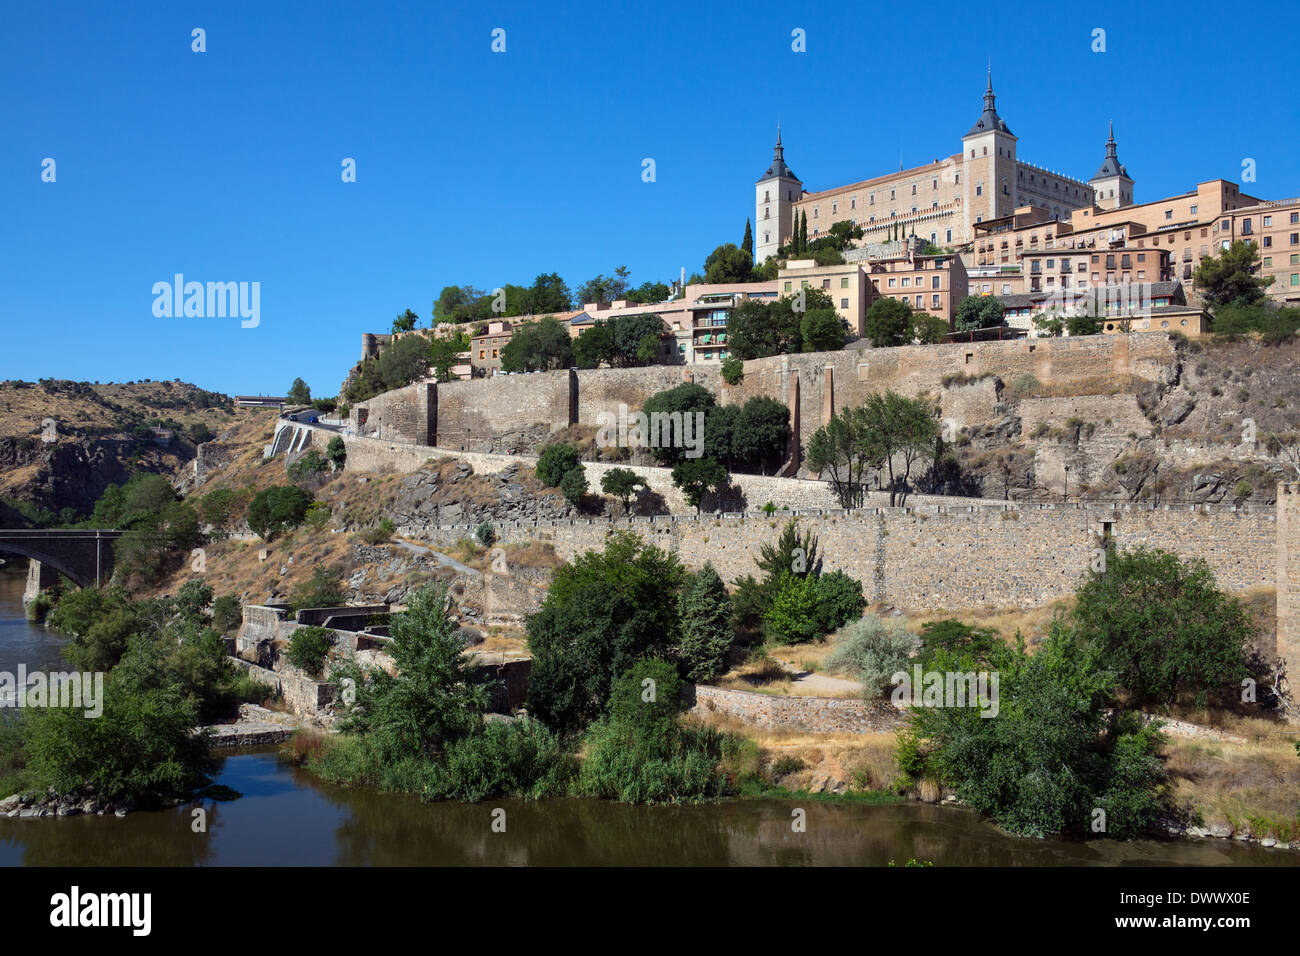 The city of Toledo in the La Mancha region of central Spain. View of the city and the Alcazar from over the River Targus. Stock Photo